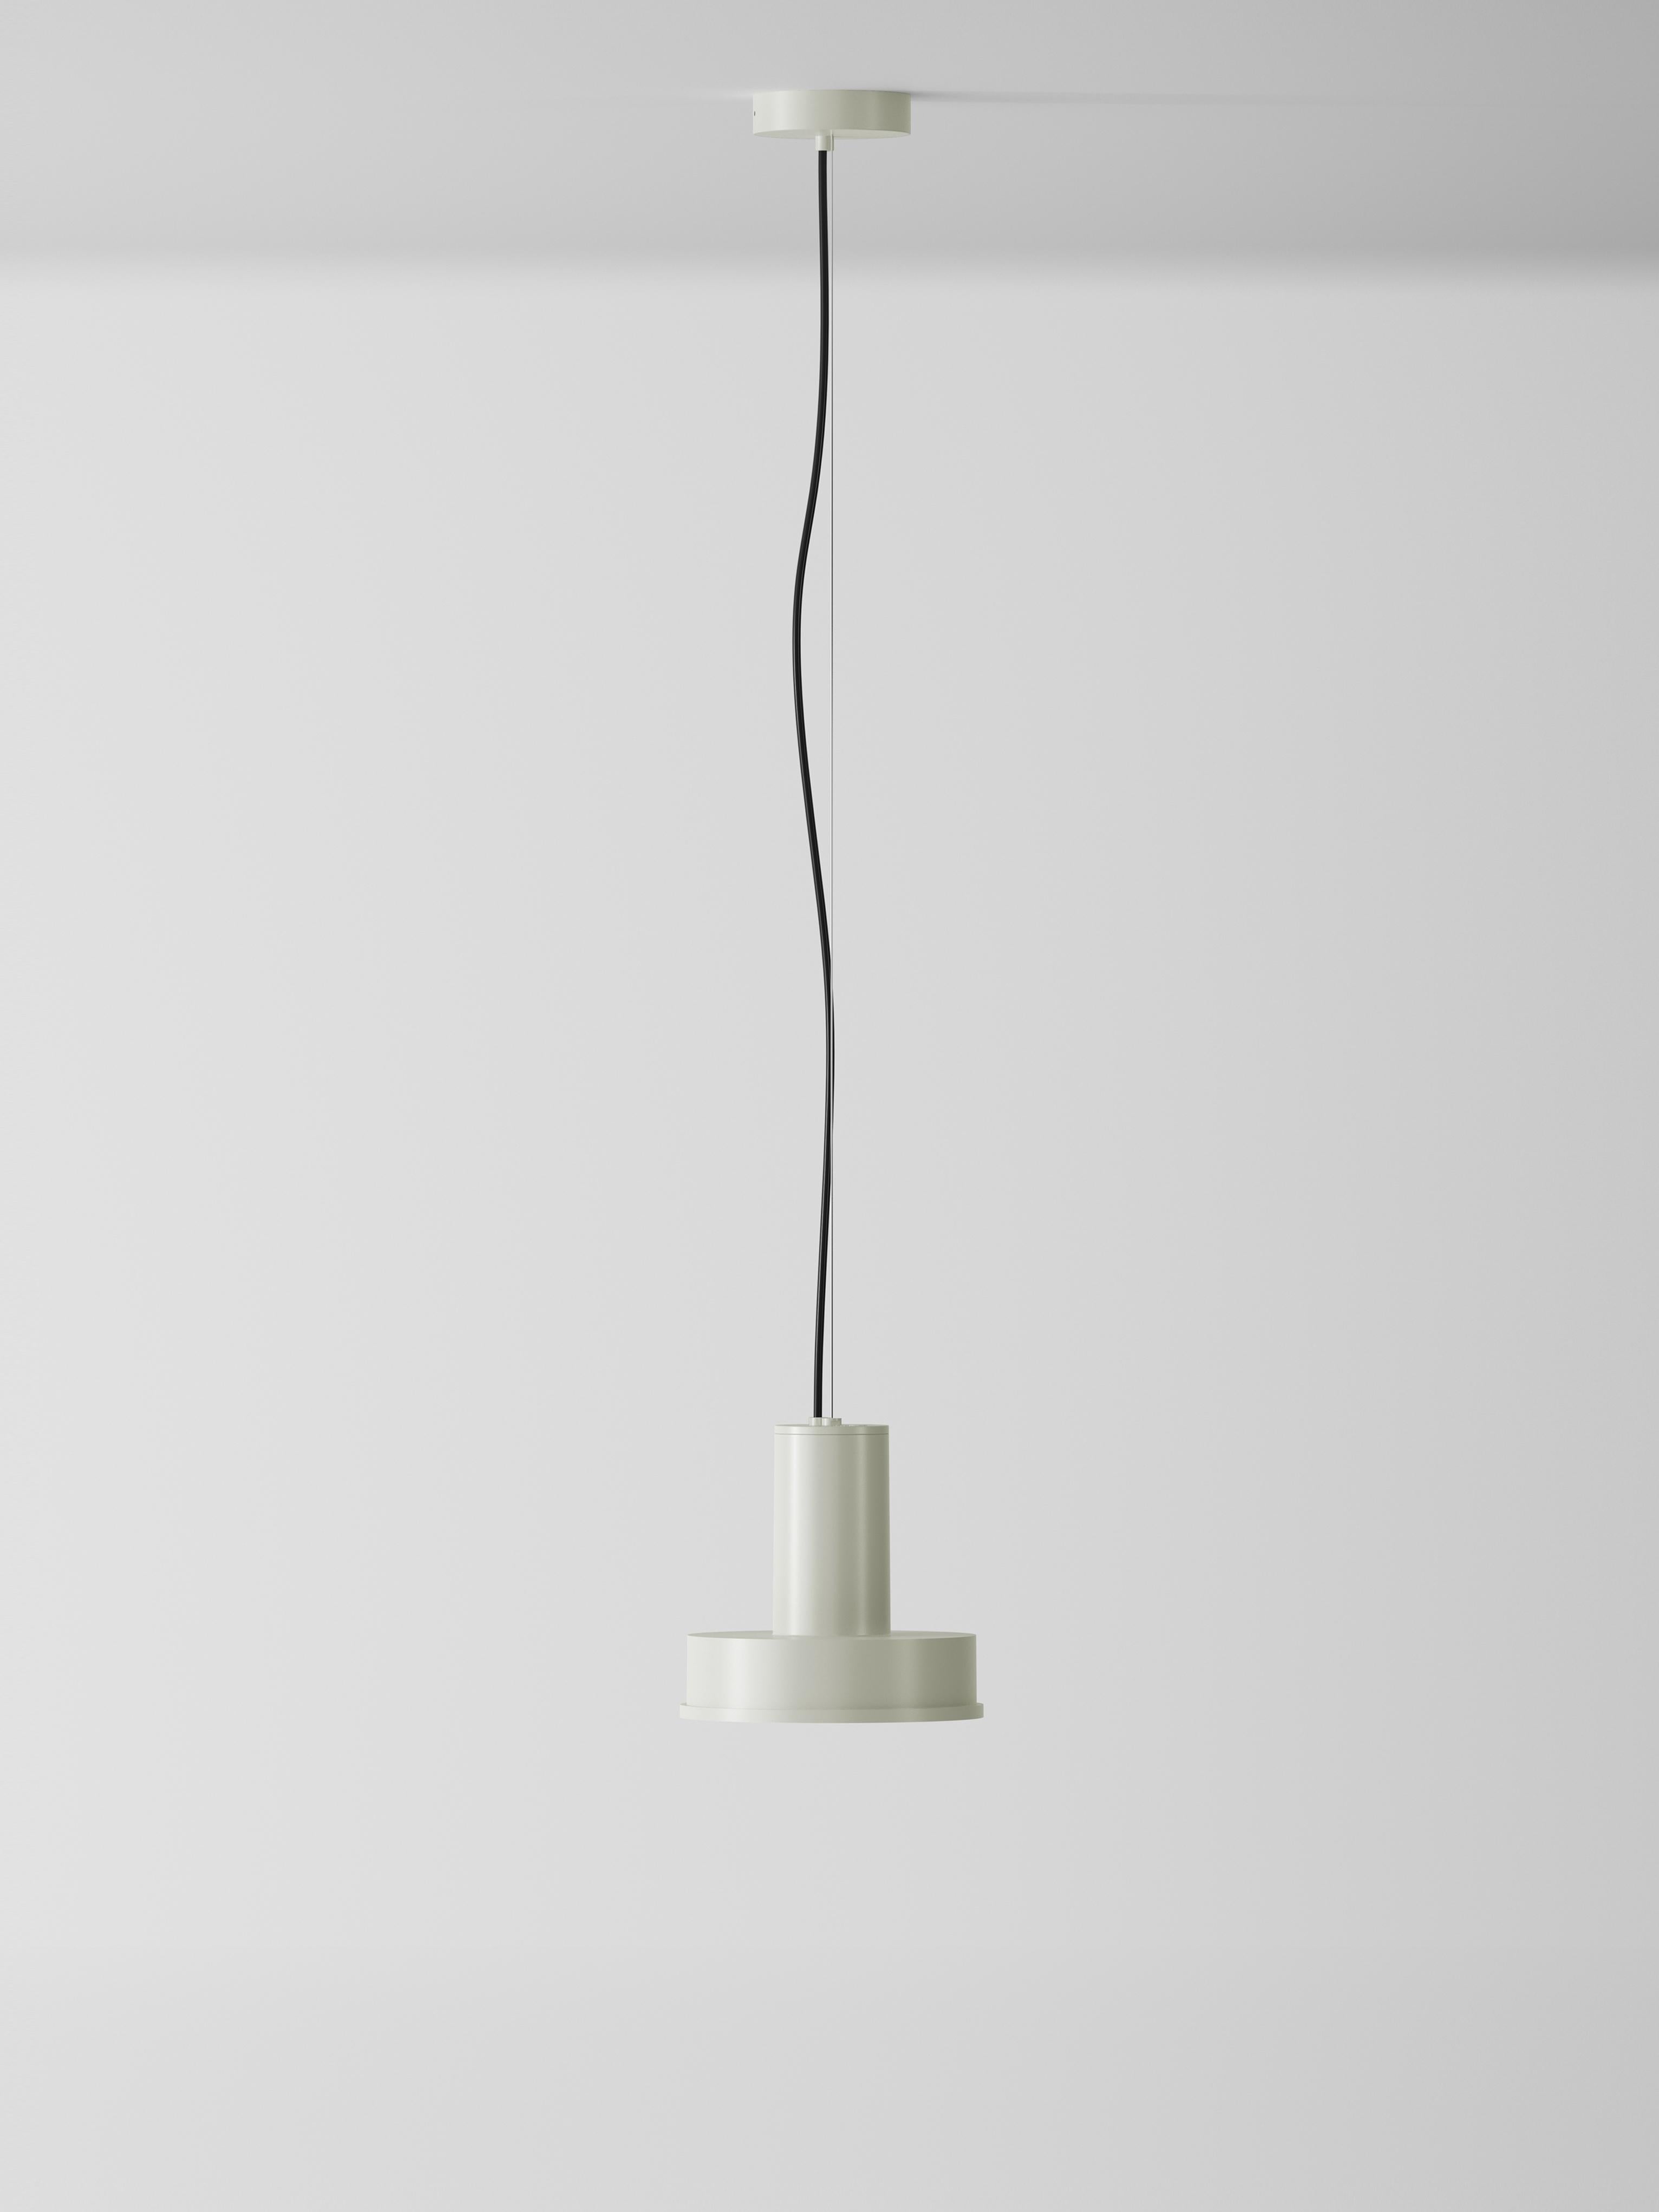 White arne S domus pendant lamp by Santa & Cole
Dimensions: D 23 x H 440 cm
Materials: Metal, aluminum.
Available in other colors.

Its aluminium body houses the very best LED technology with a single COB emitter, shielded from view by a lower,